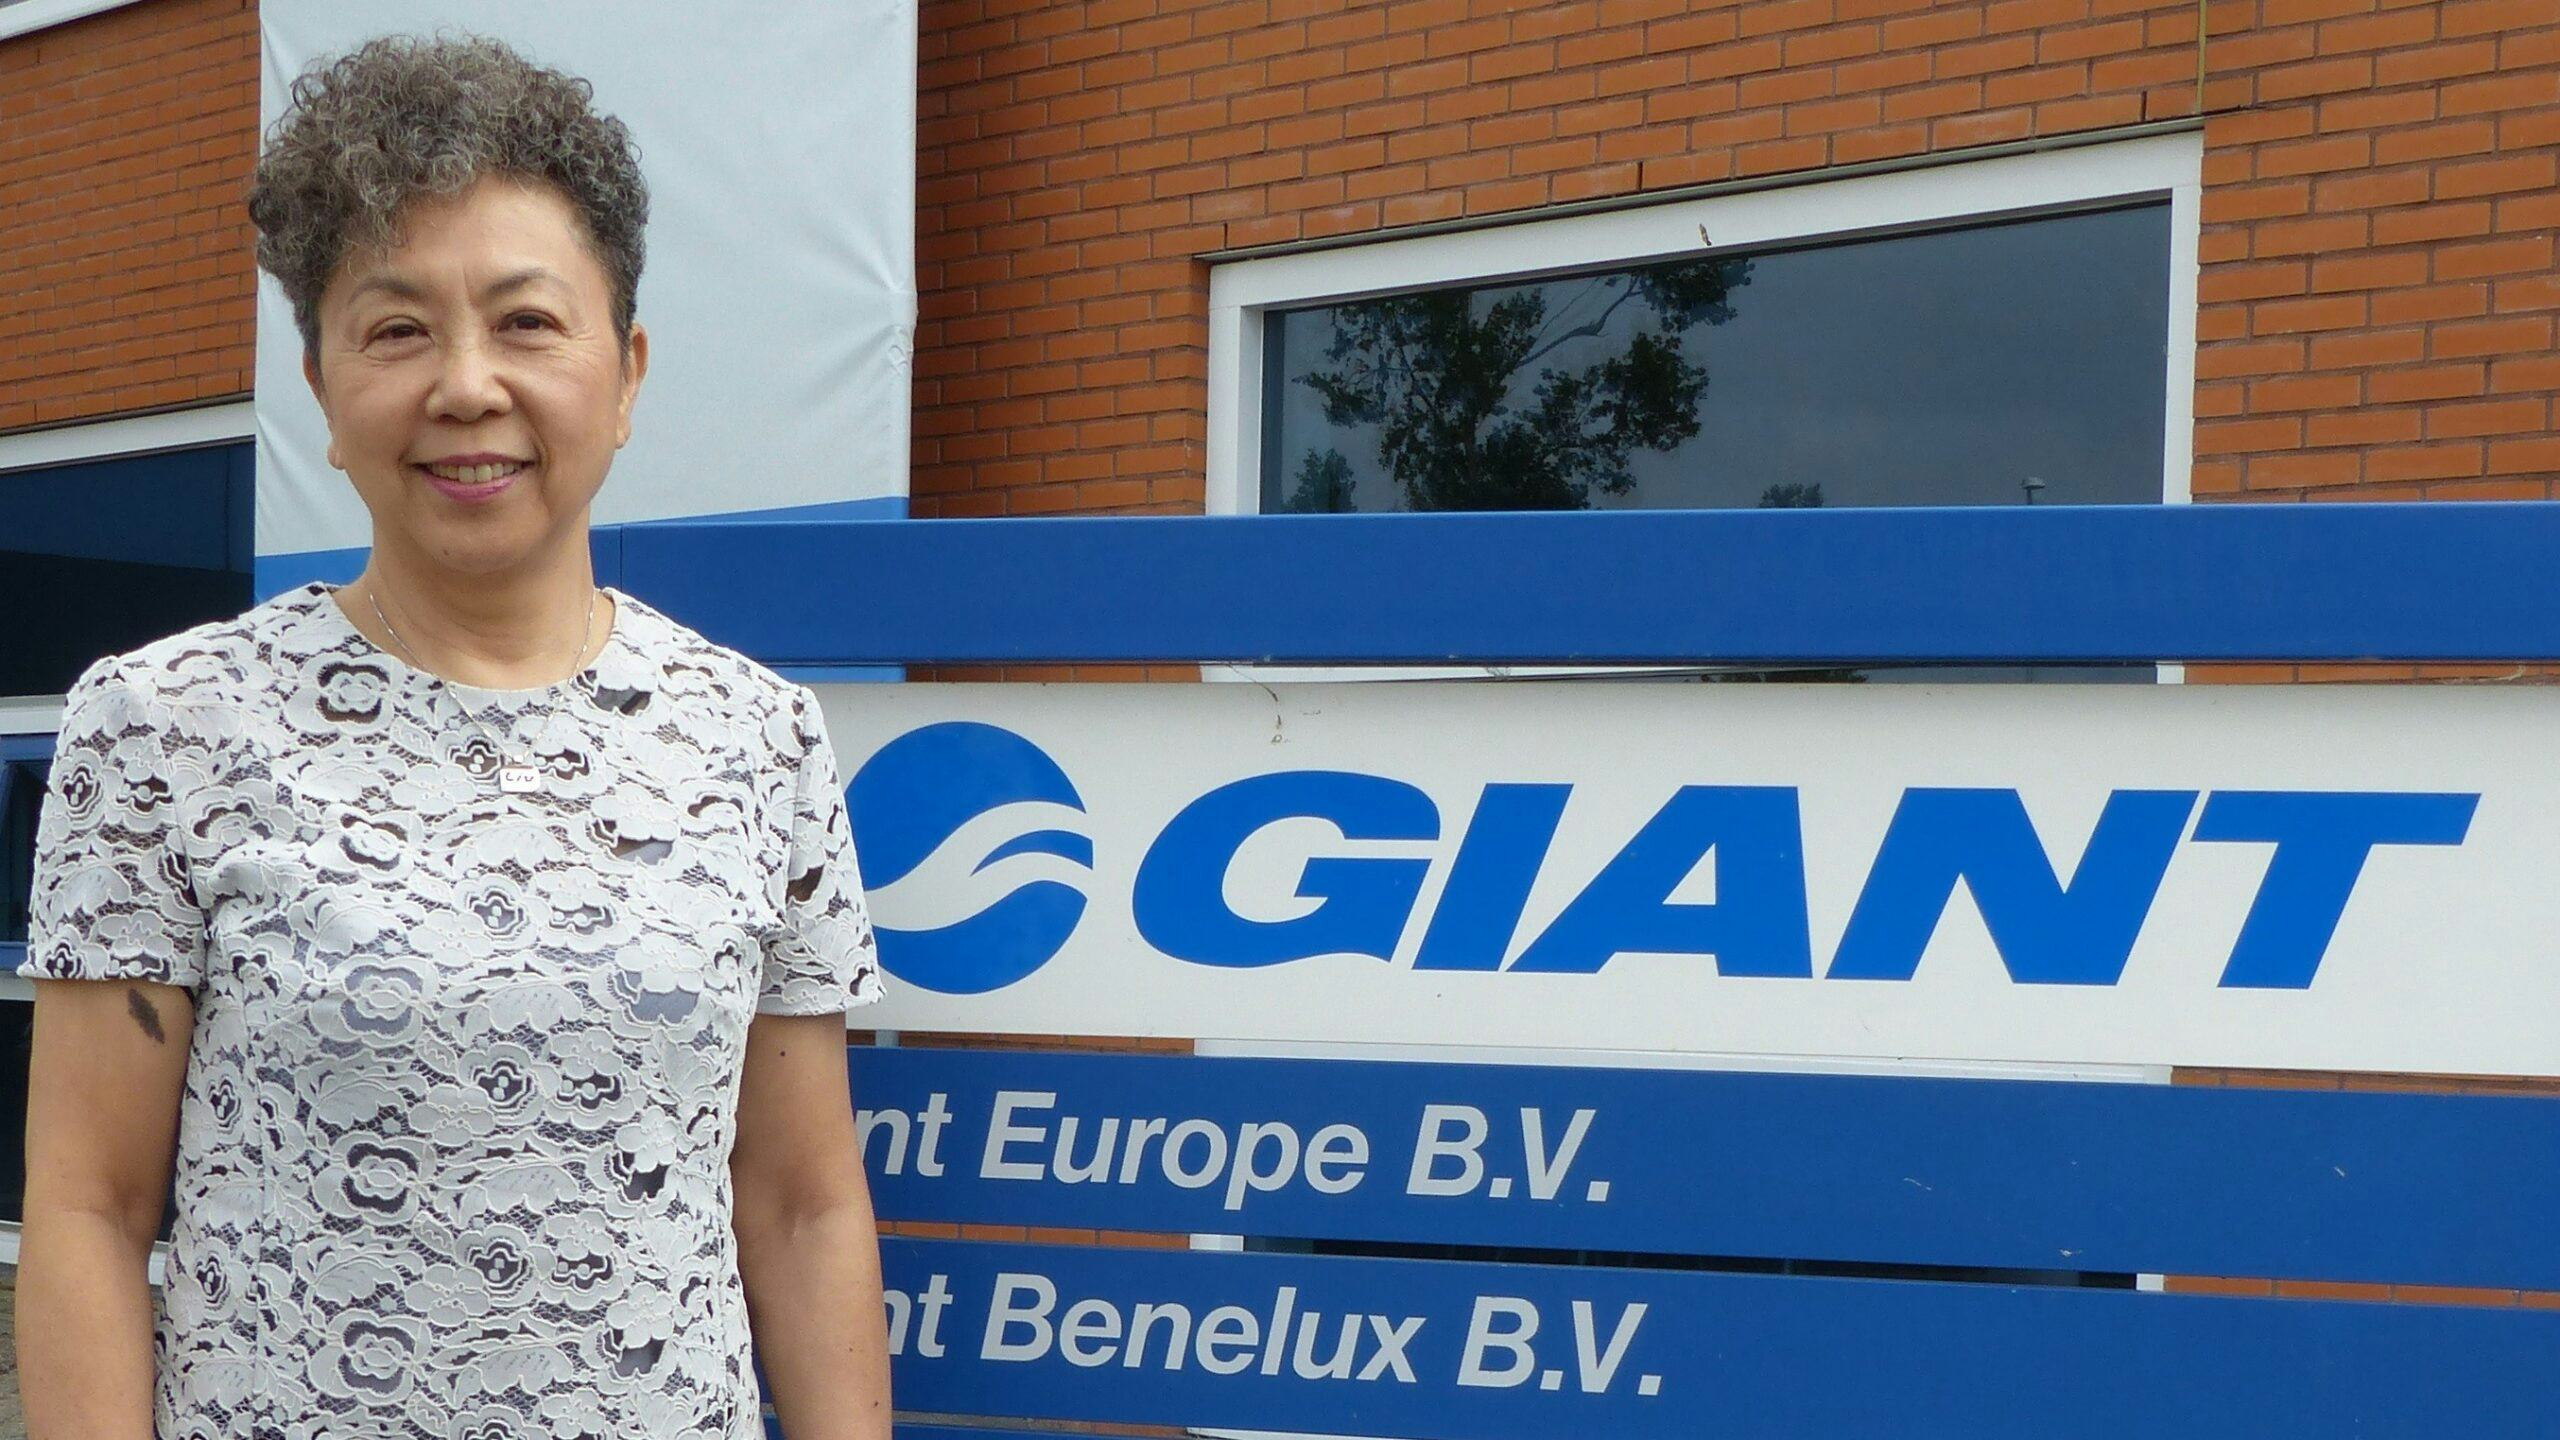 “As containers can’t reach the factories, we can’t ship the new bicycles,” said Giant Group Chairperson Bonnie Tu. – Photo Bike Europe 